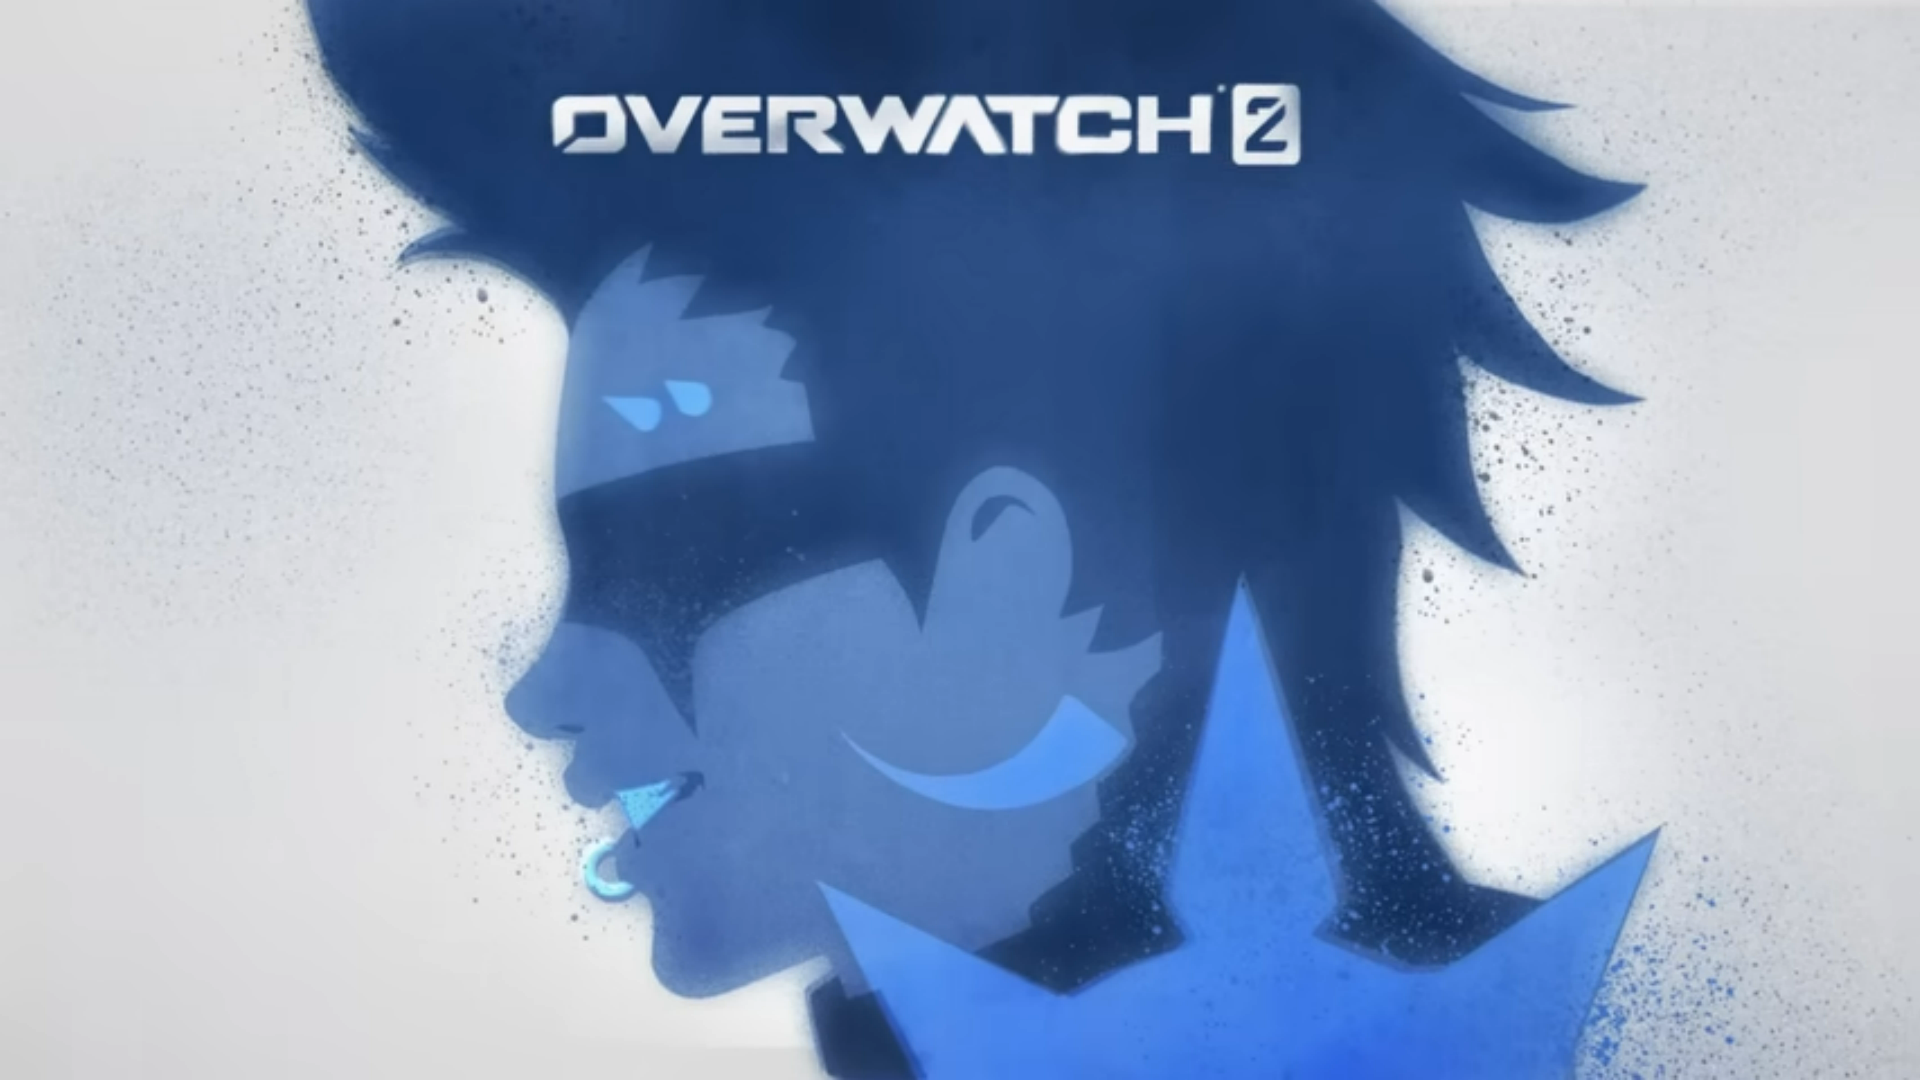 Overwatch 2 To Replace The First Game Entirely